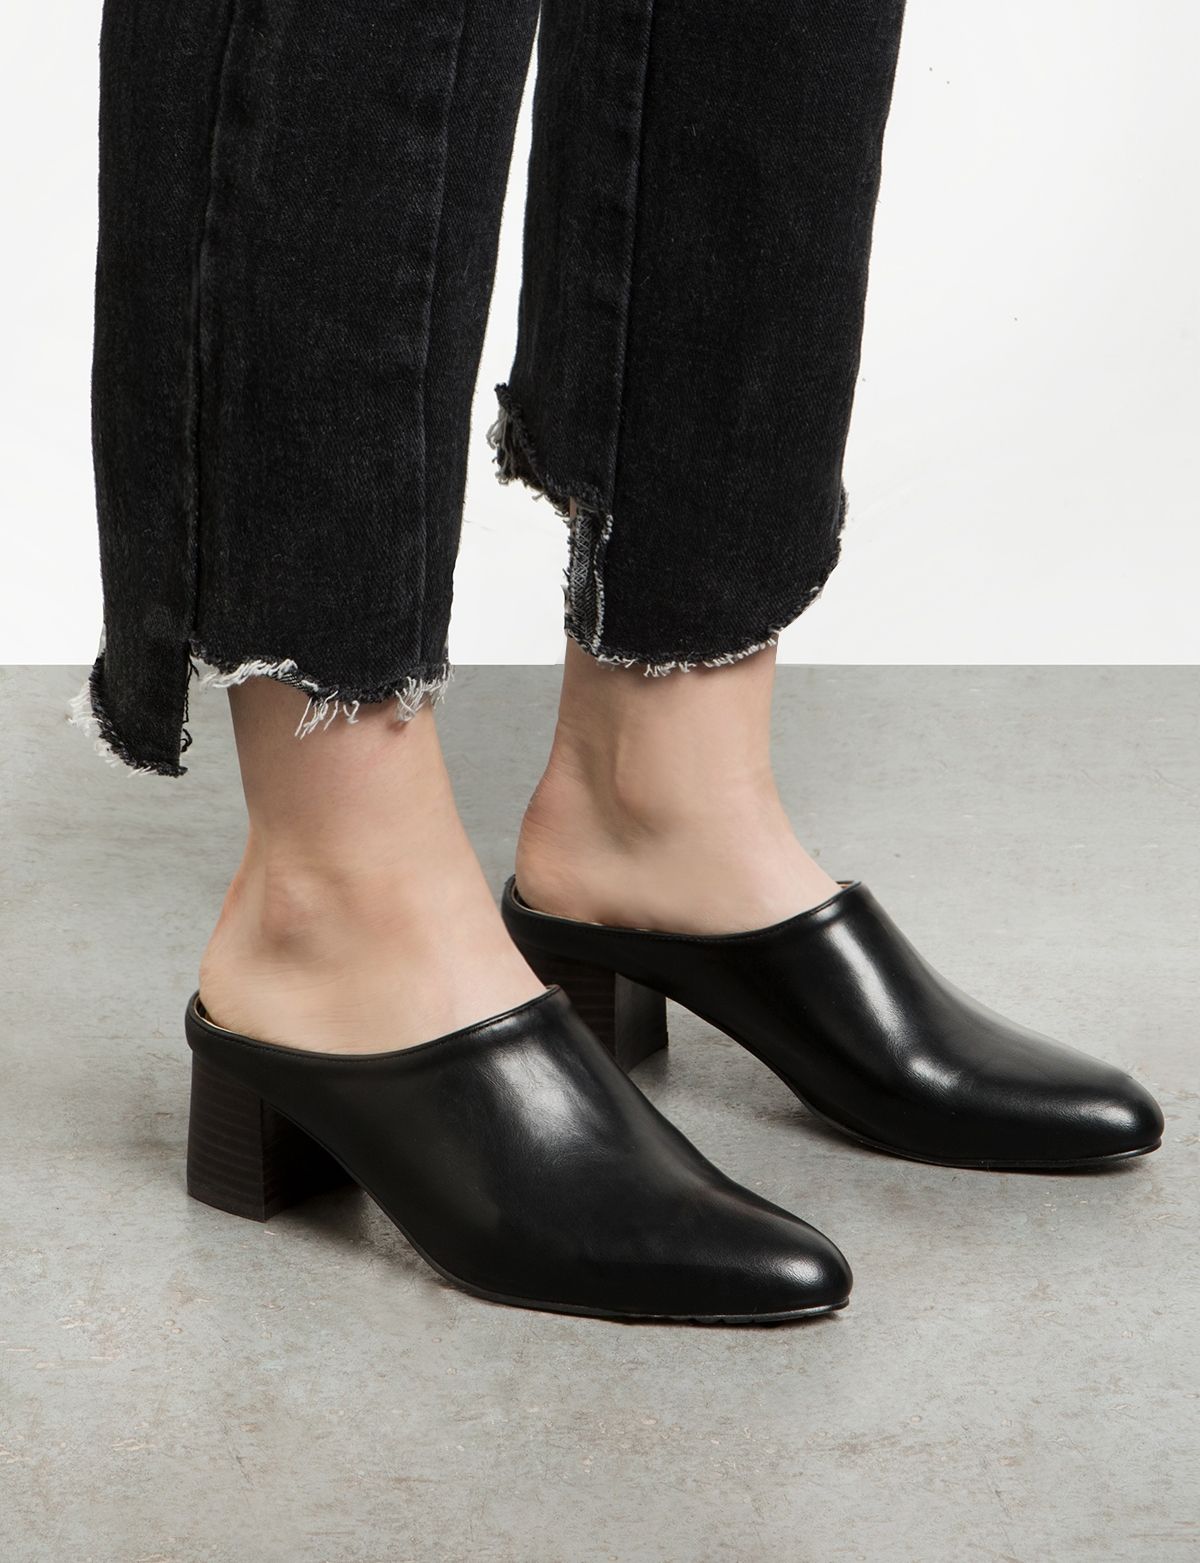 get this perfectly transitional shoe before it’s gone